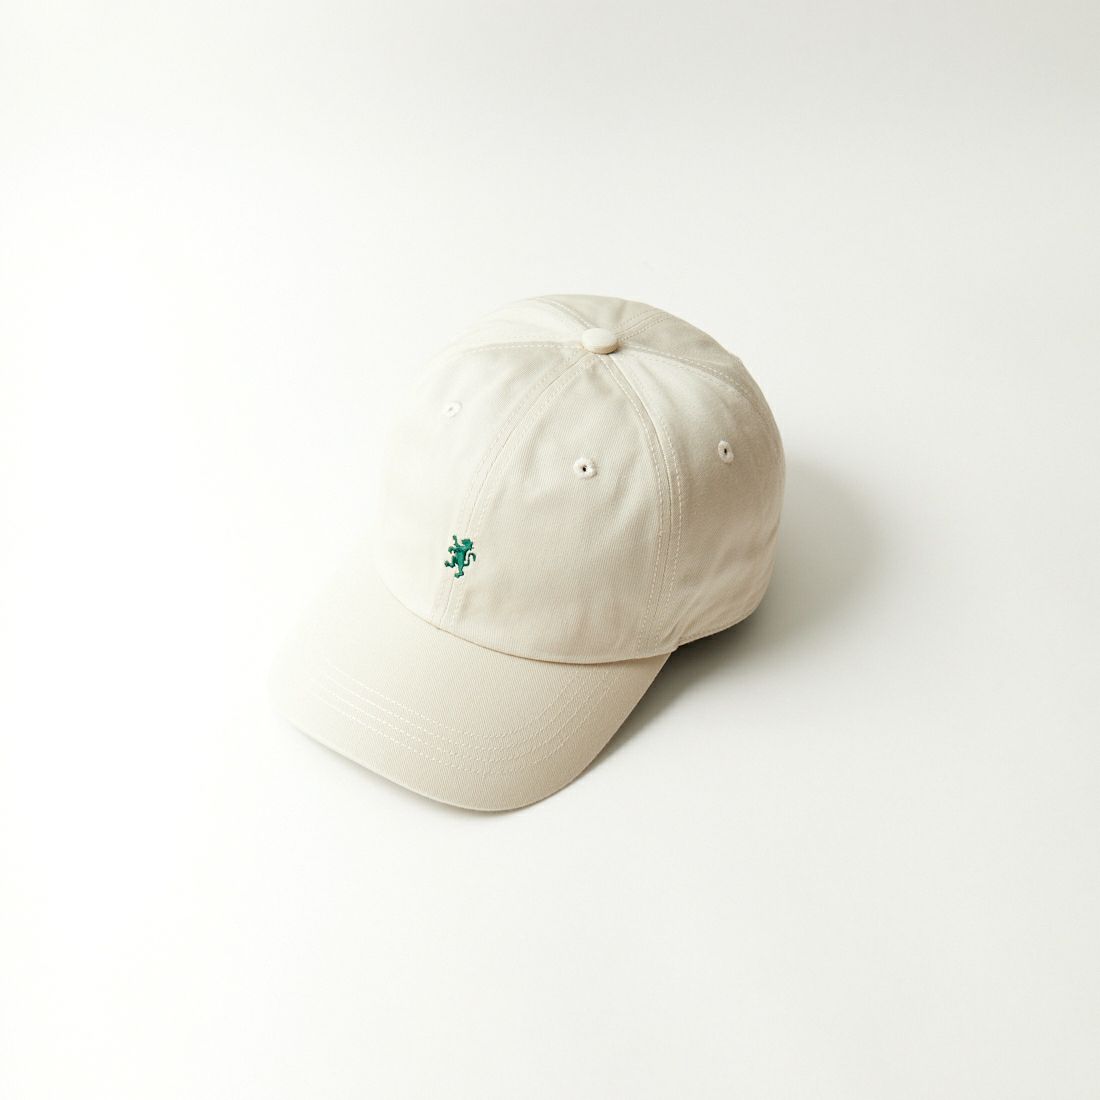 Gymphlex [ジムフレックス] チノクロス 6パネルキャップ [GY-H0276TKC] OFF WHITE